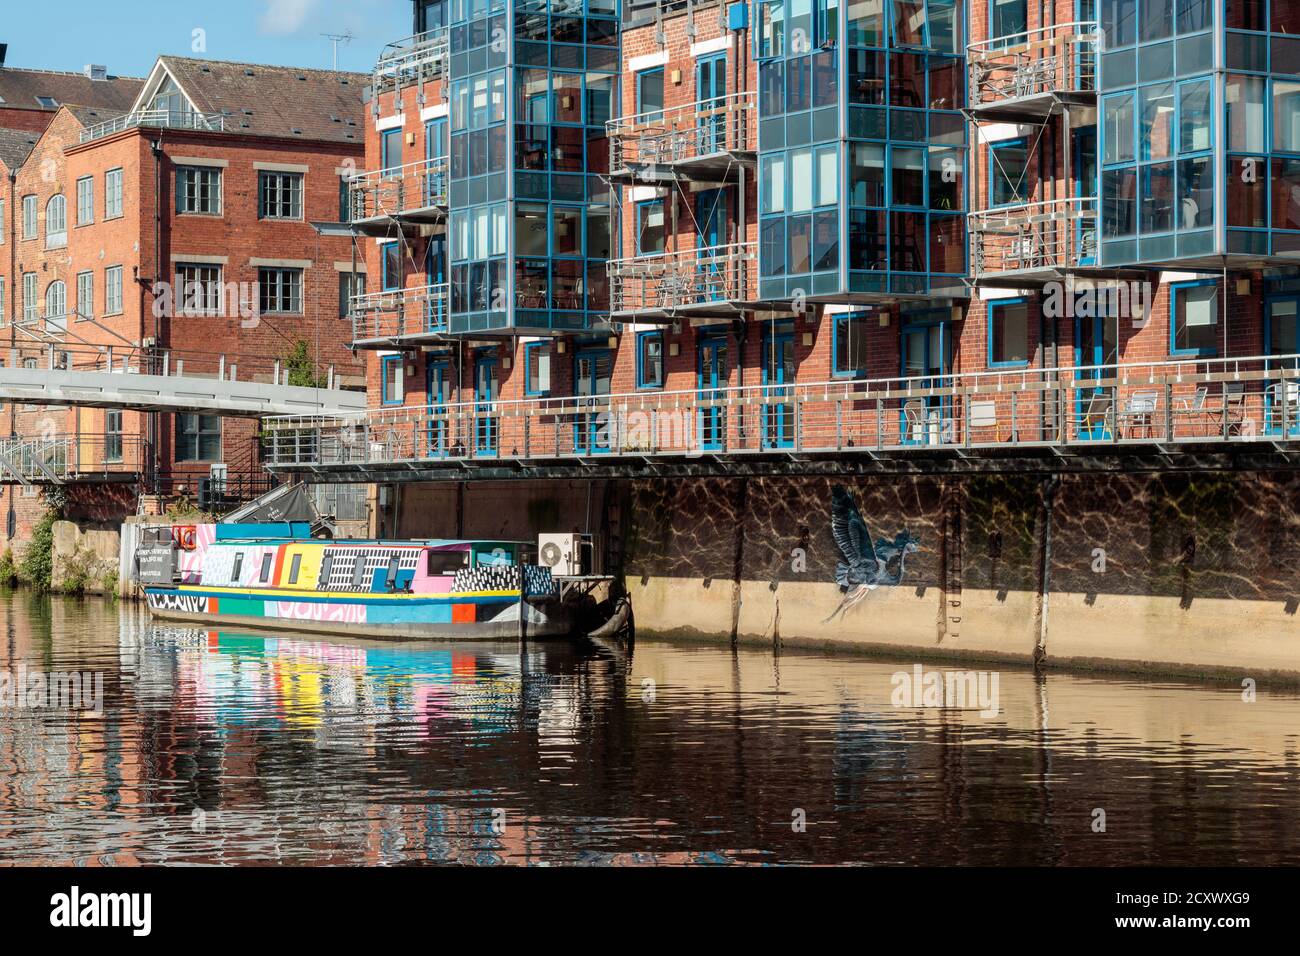 View of colourful barge on the River Aire in Leeds City Centre Stock Photo